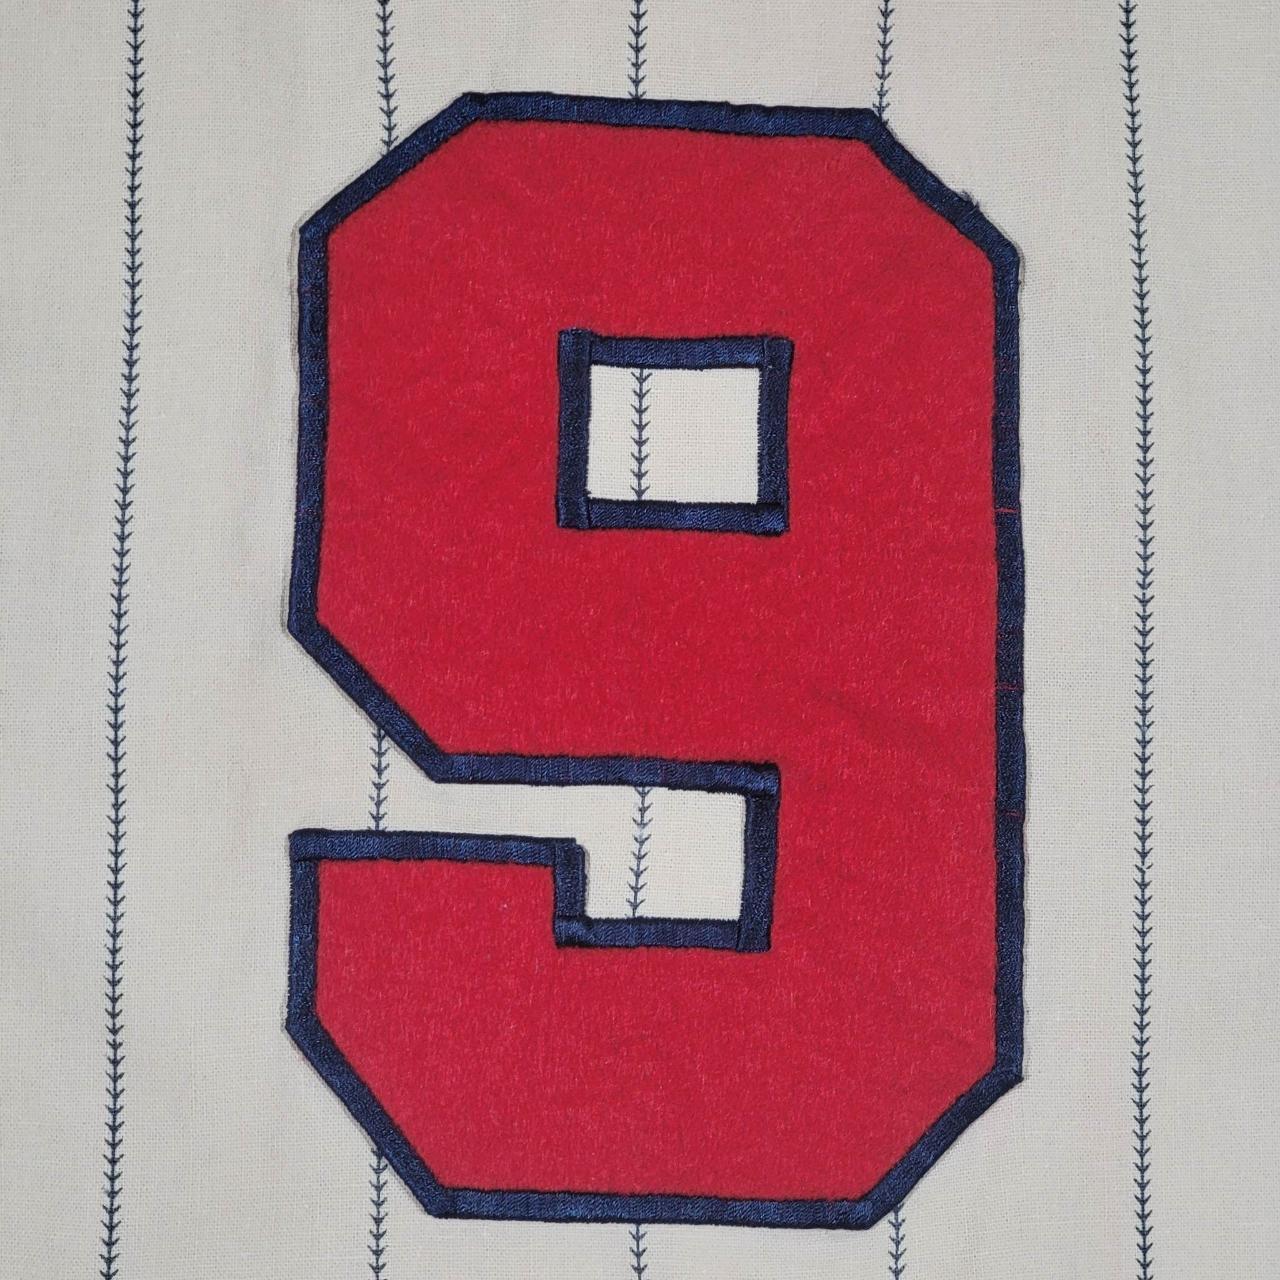 MLB Boston Red Sox Baseball Ted Williams 9 Cooperstown Jersey